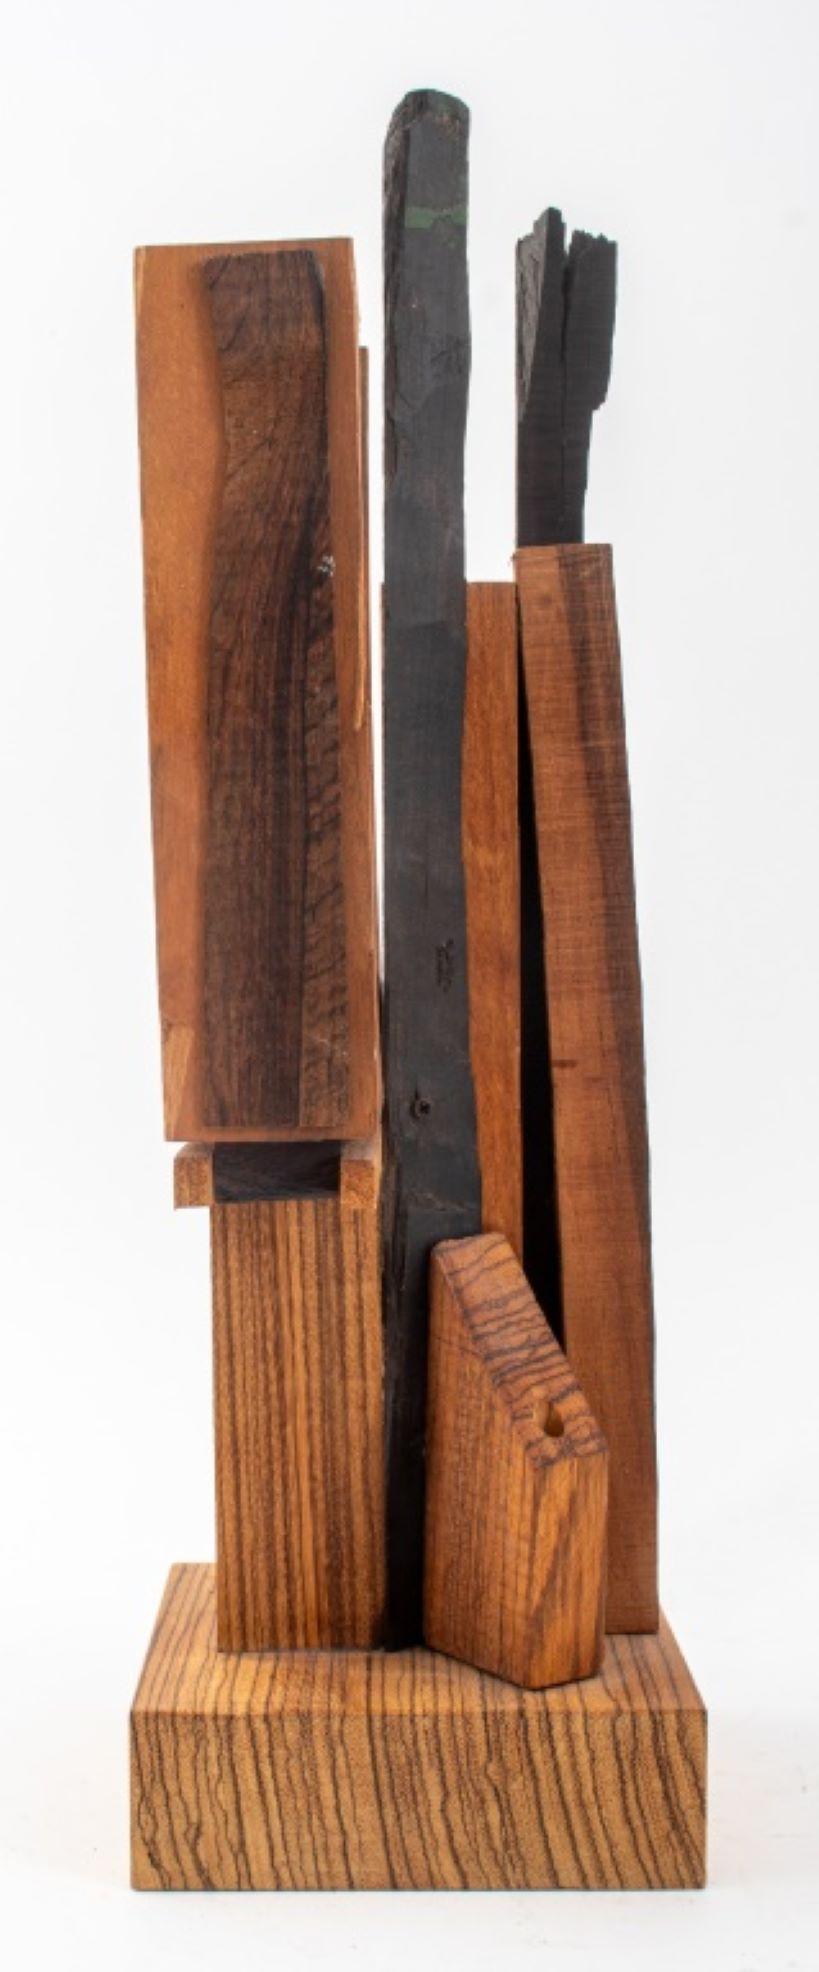 Joan Hyde Shapiro (American, XX-XXI) wood sculpture of a Constructivist assemblage composition with ebonized wood elements, in the manner of Kurt Schwitters (German, 1887-1948) and Kazimir Malevich (Russian, born Ukraine, 1879-1935), apparently